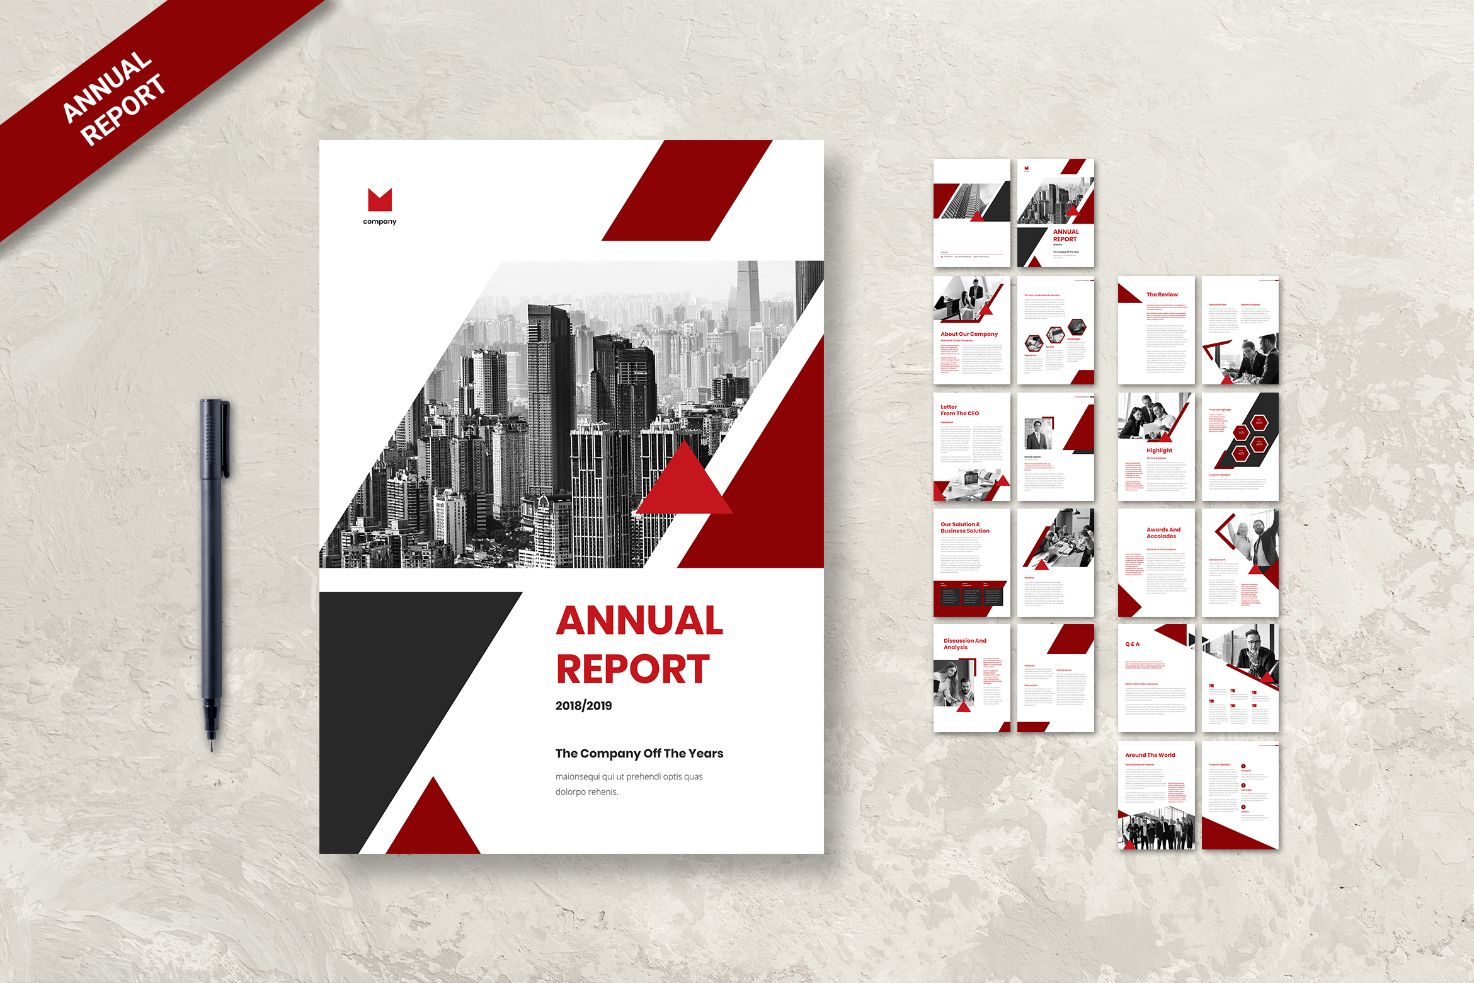 Best Annual Report Template Designs - Geometric Black, Red and White Design